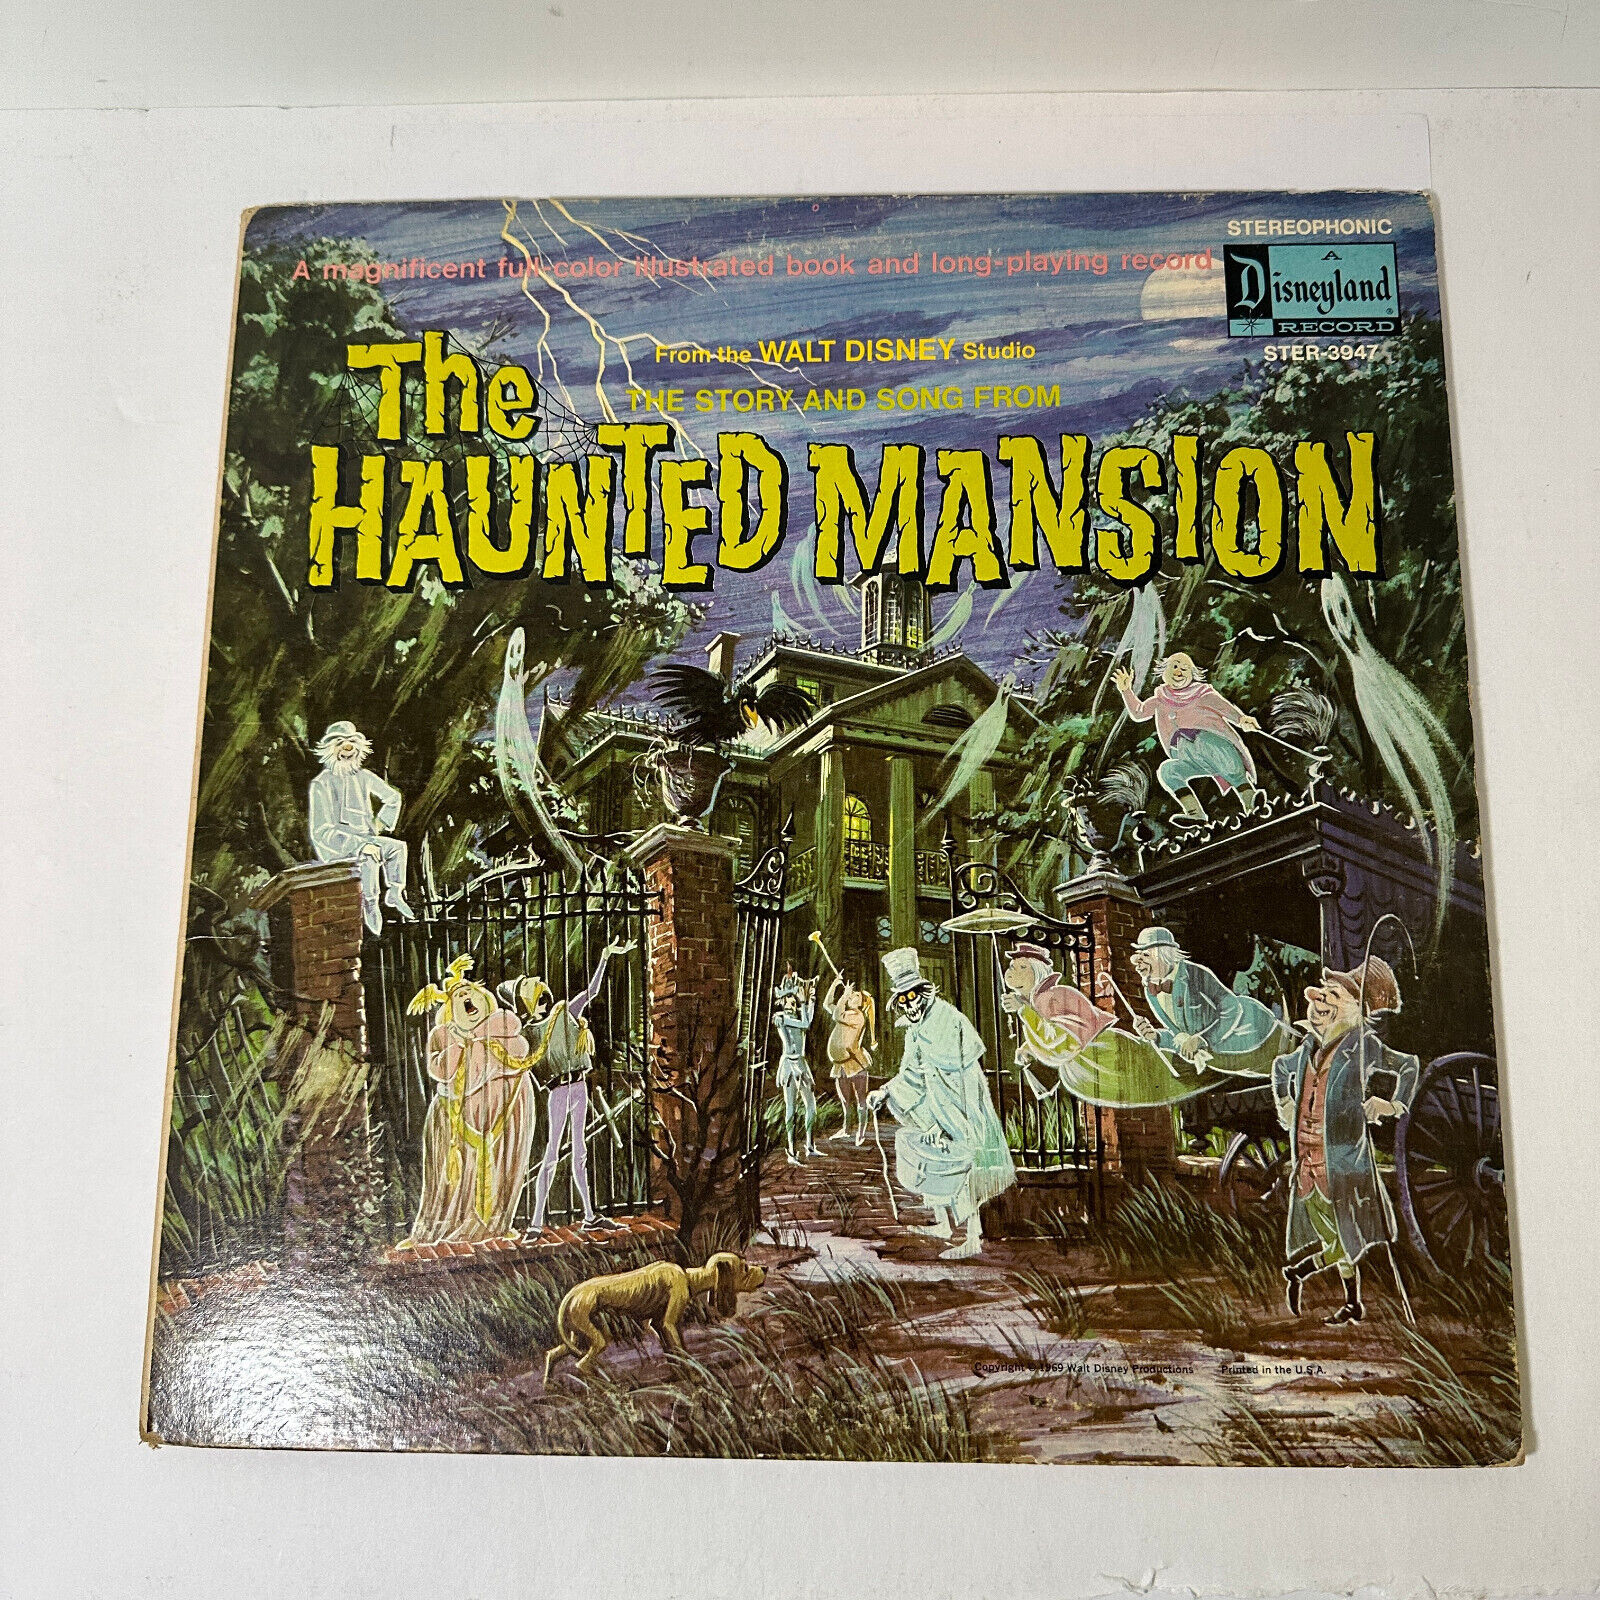 1969 Disney Story and Song The Haunted Mansion Vinyl Record Disneyland USED SEE